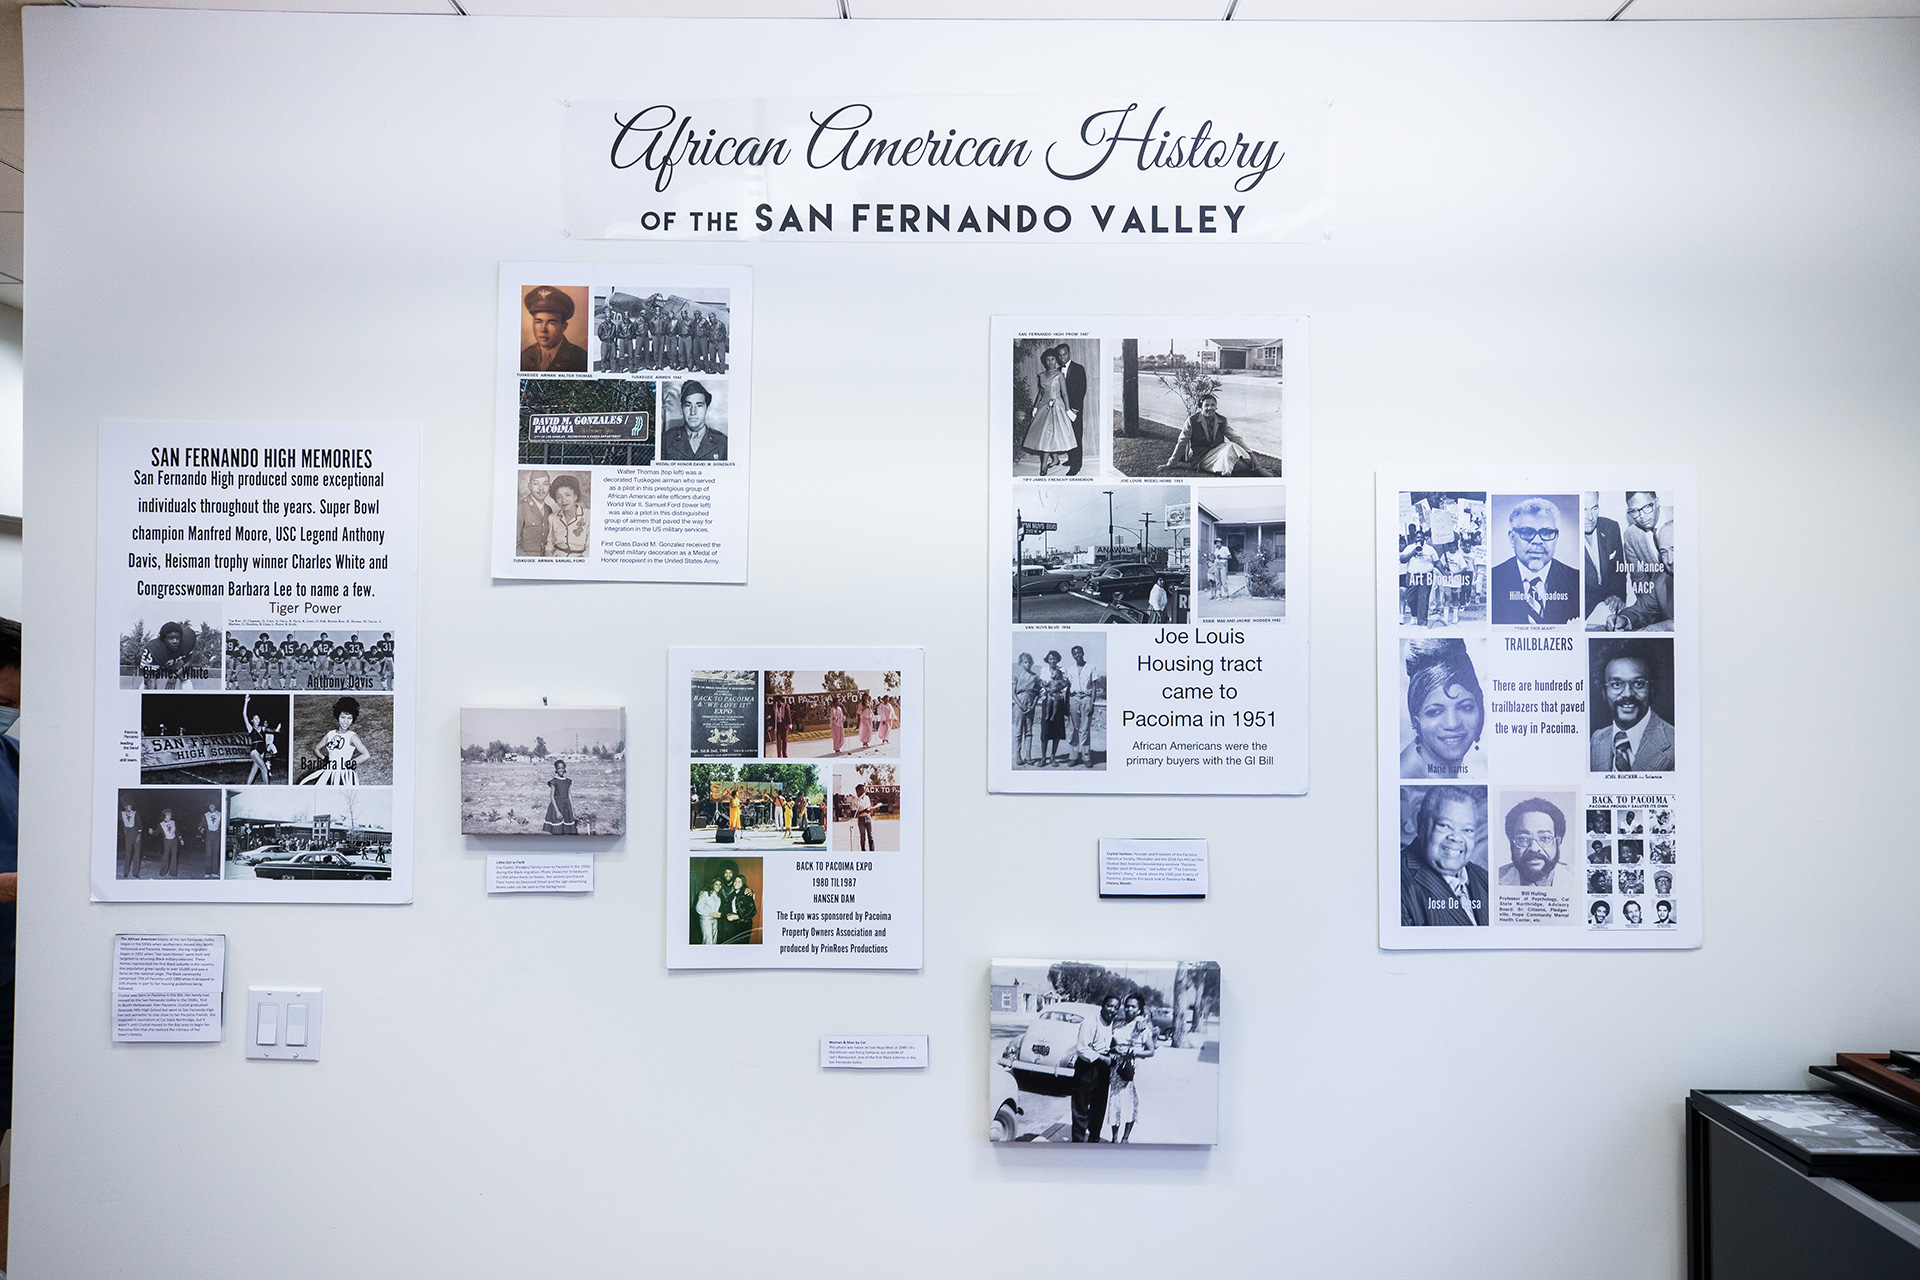 history-close-to-home-15-museum-of-the-san-fernando-valley-african-american-history